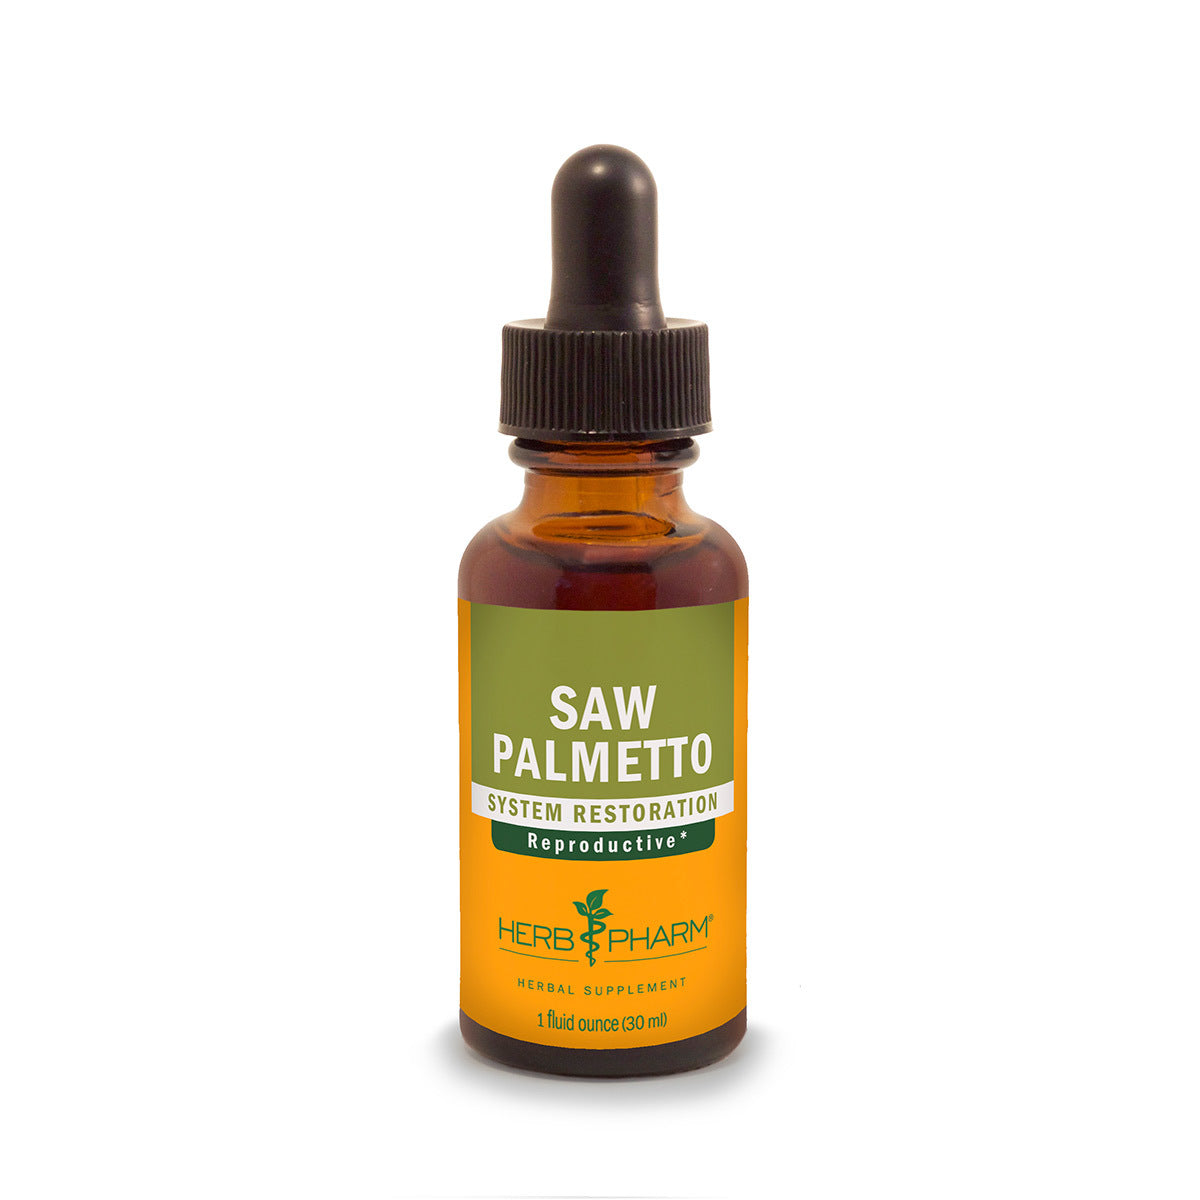 Primary image of Saw Palmetto Extract